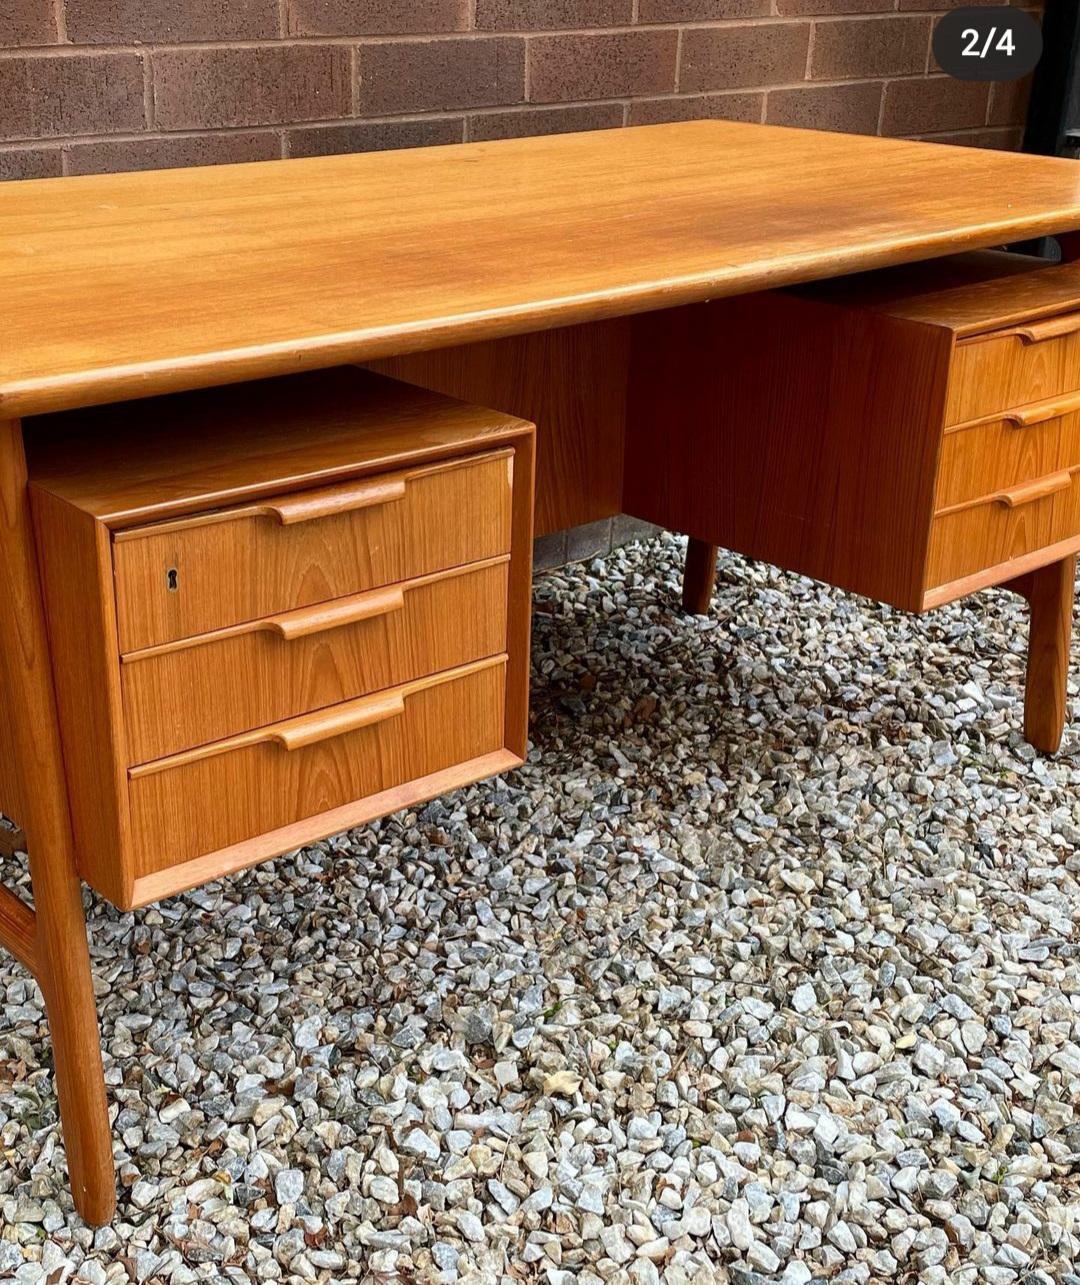 Omann Jun teak floating desk in great condition. It has storage on both sides of the desk.